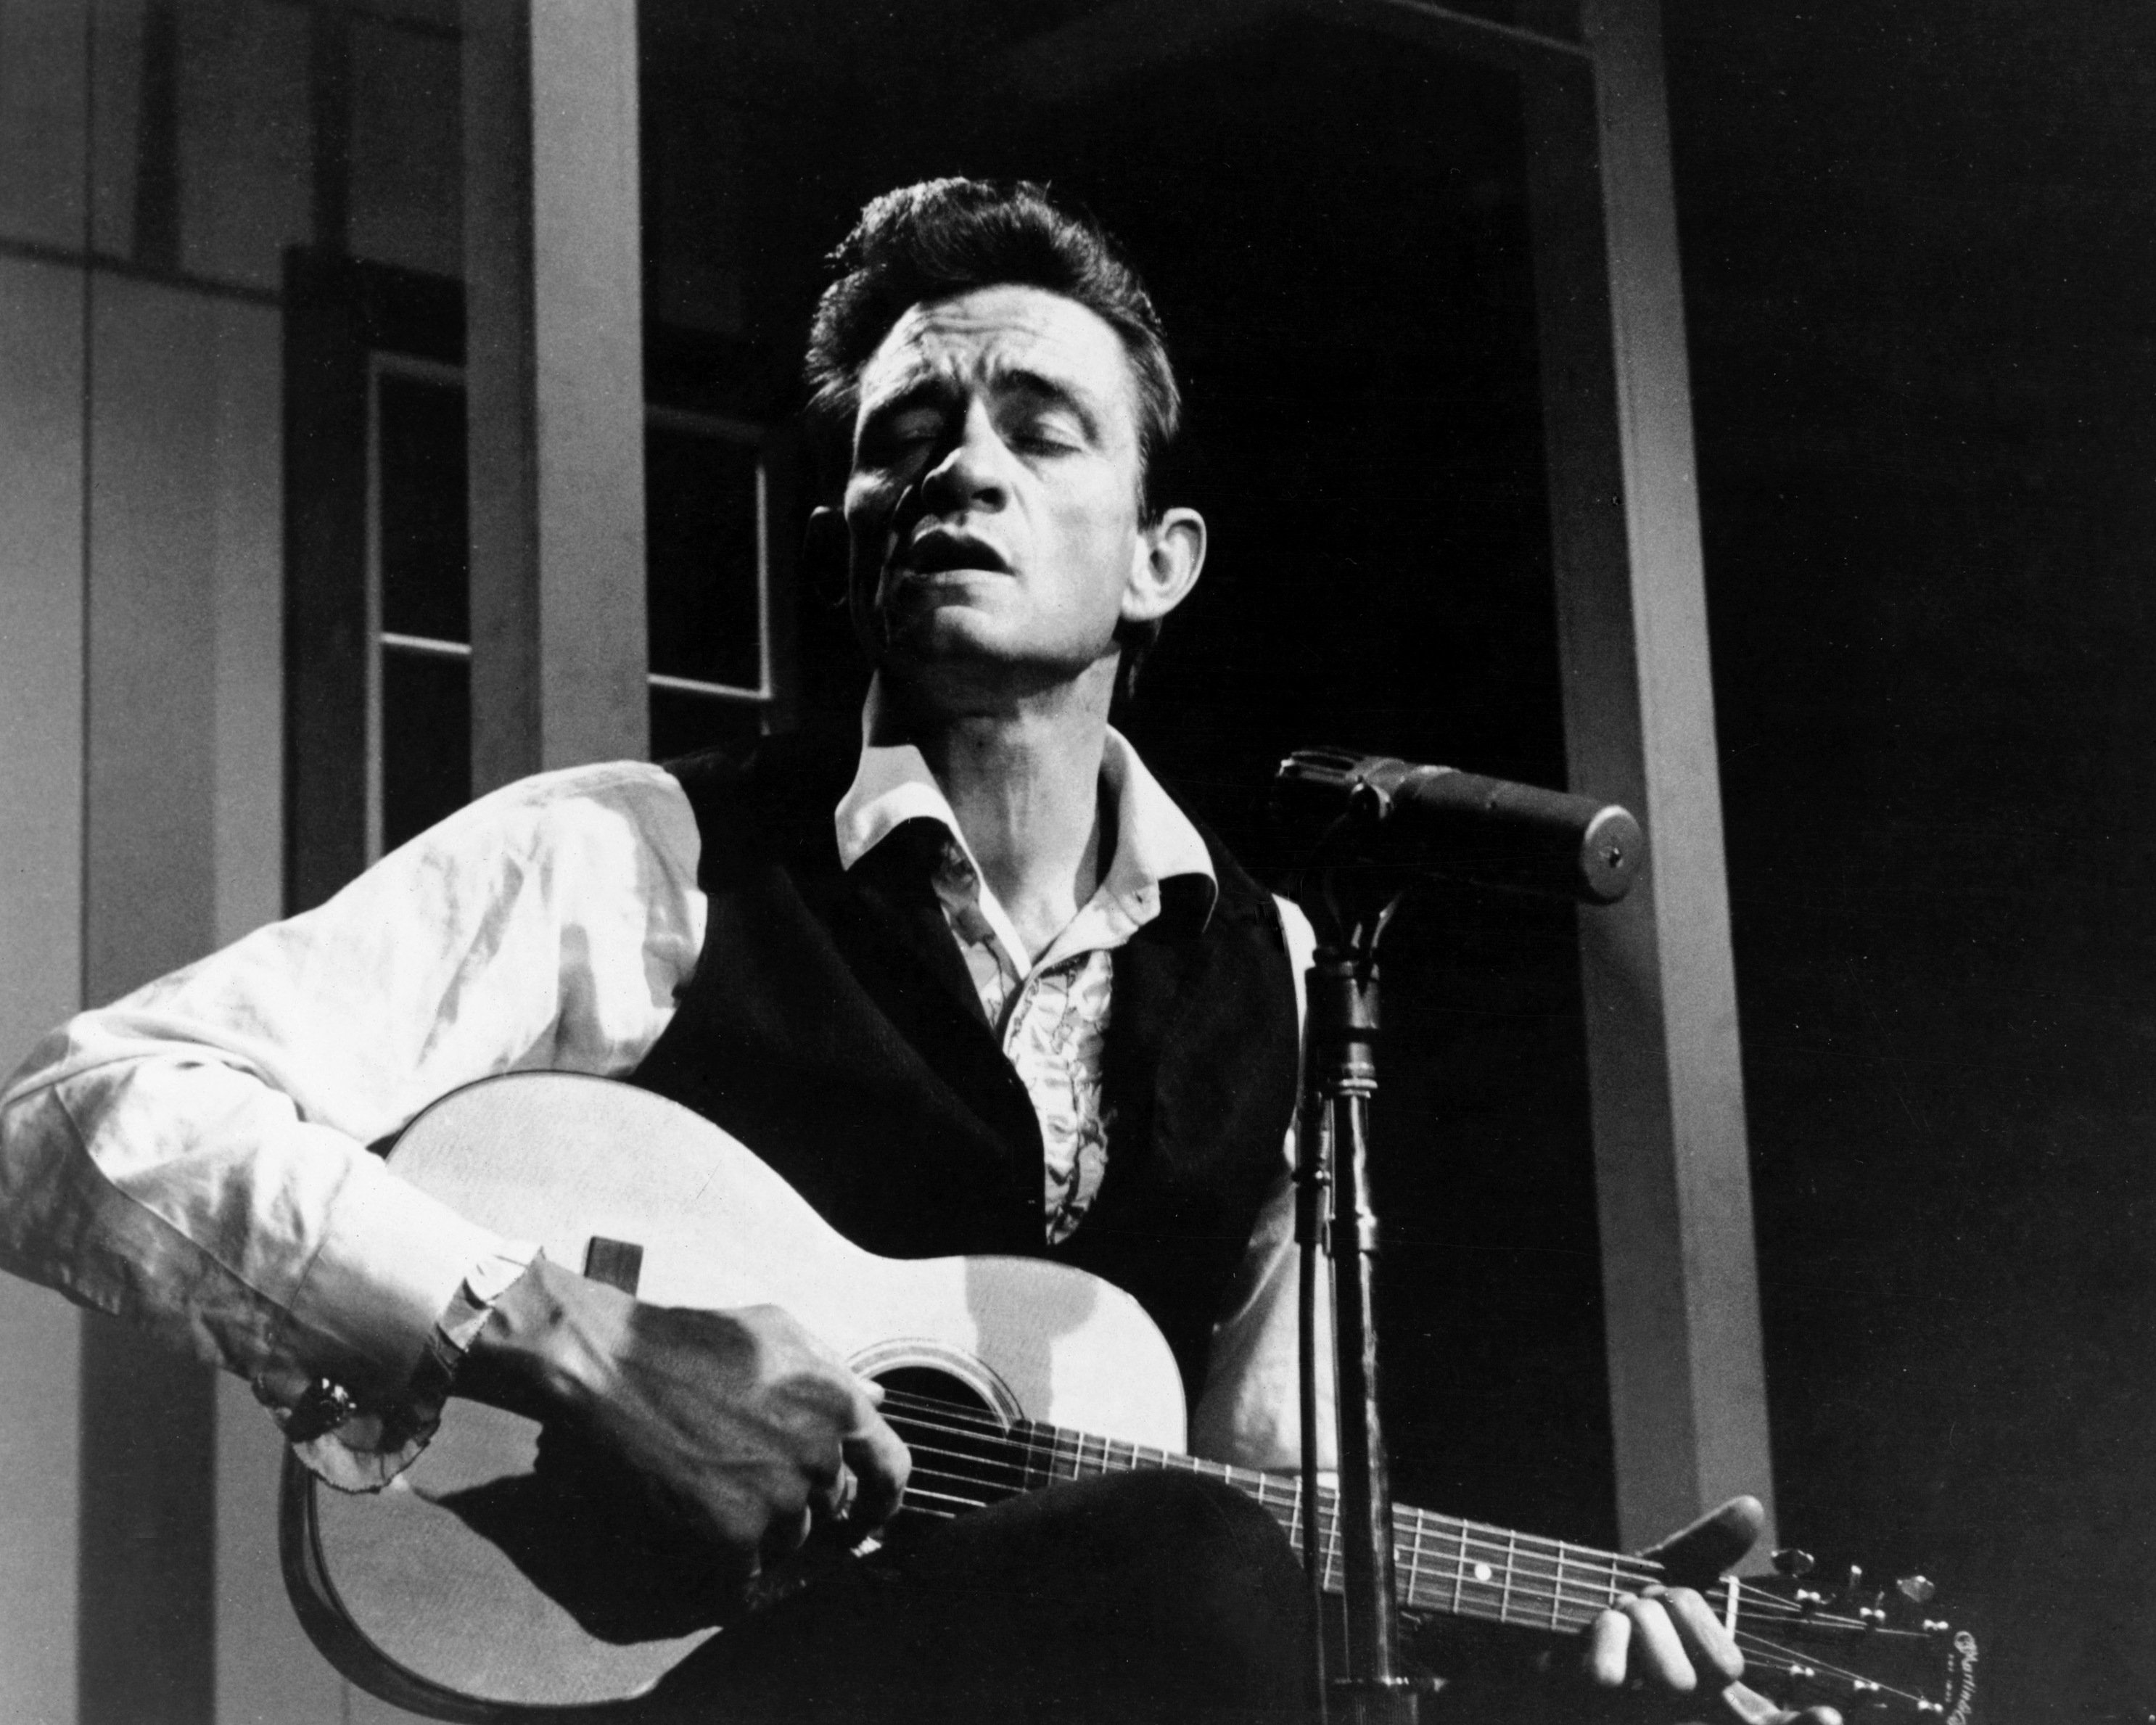 Johnny Cash with a guitar